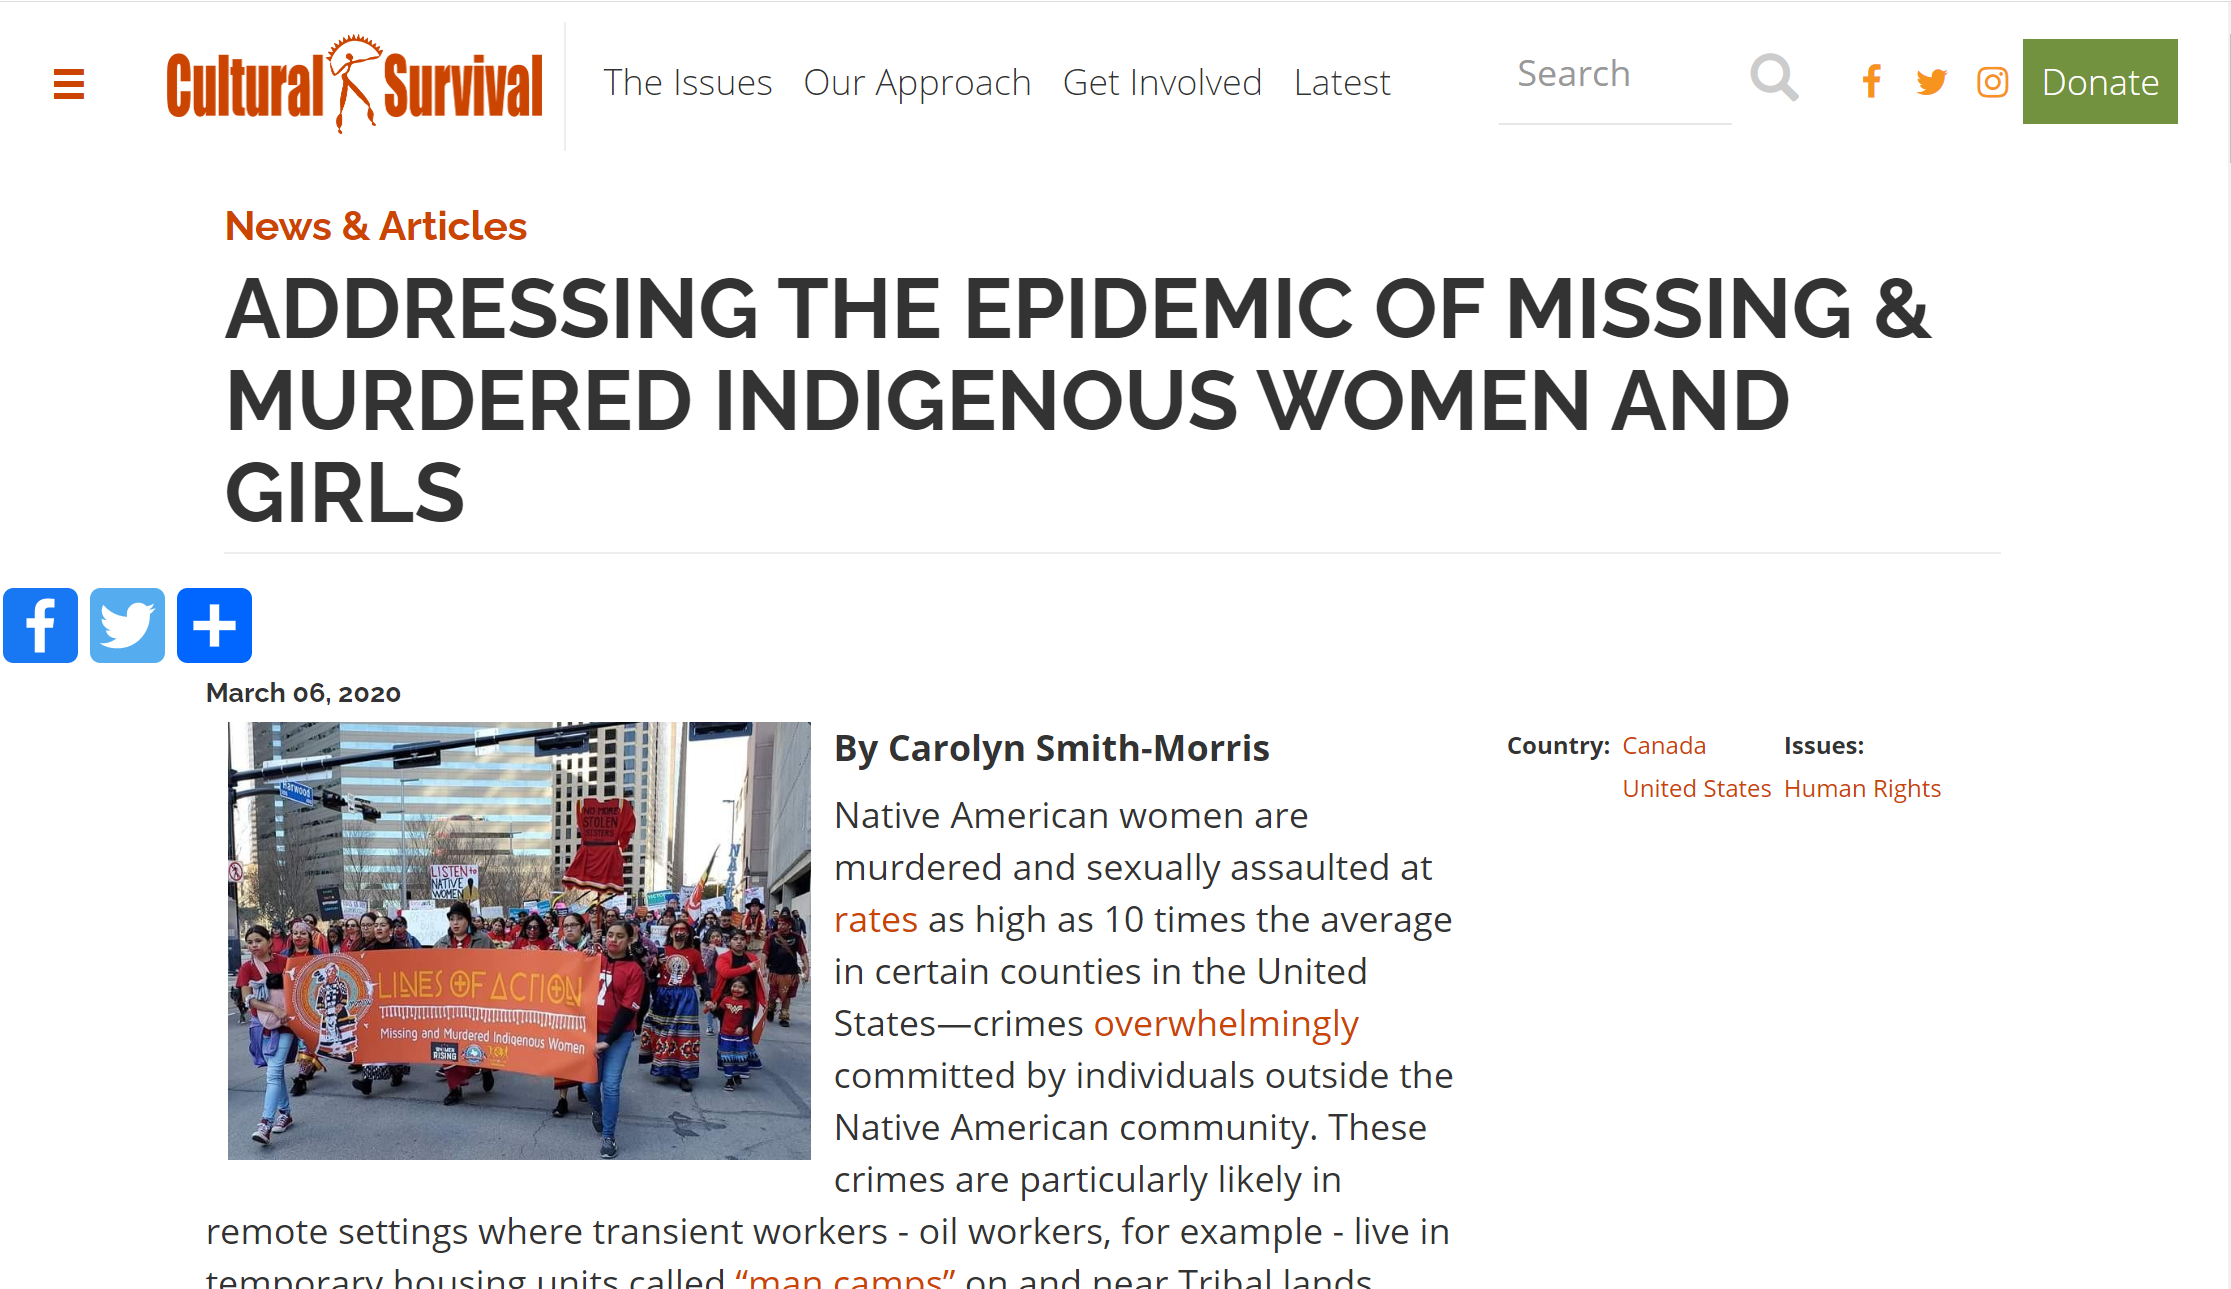 Article about missing Indigenous women and girls.